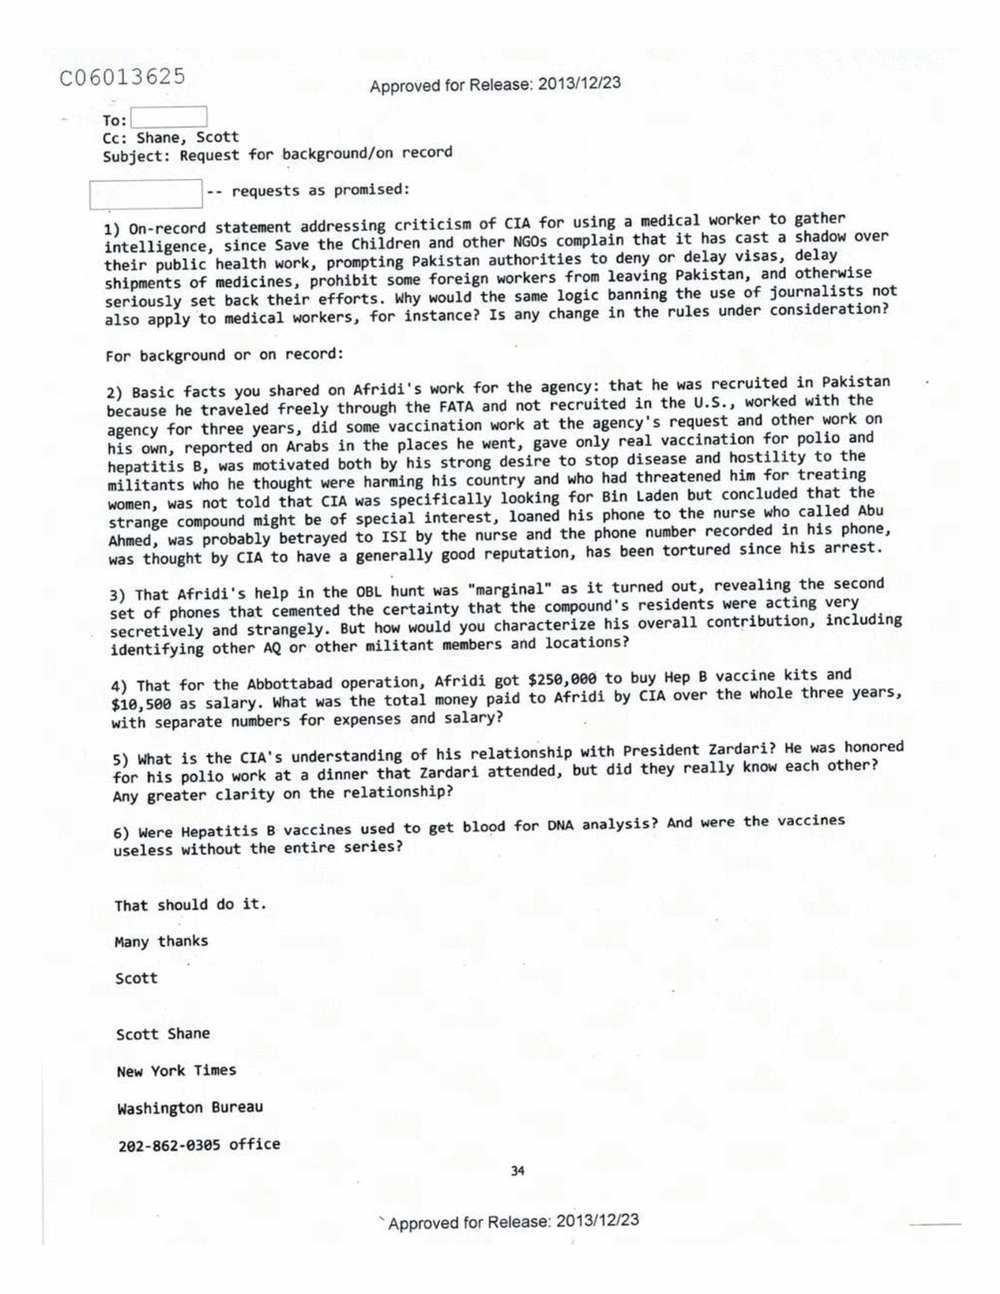 Page 462 from Email Correspondence Between Reporters and CIA Flacks